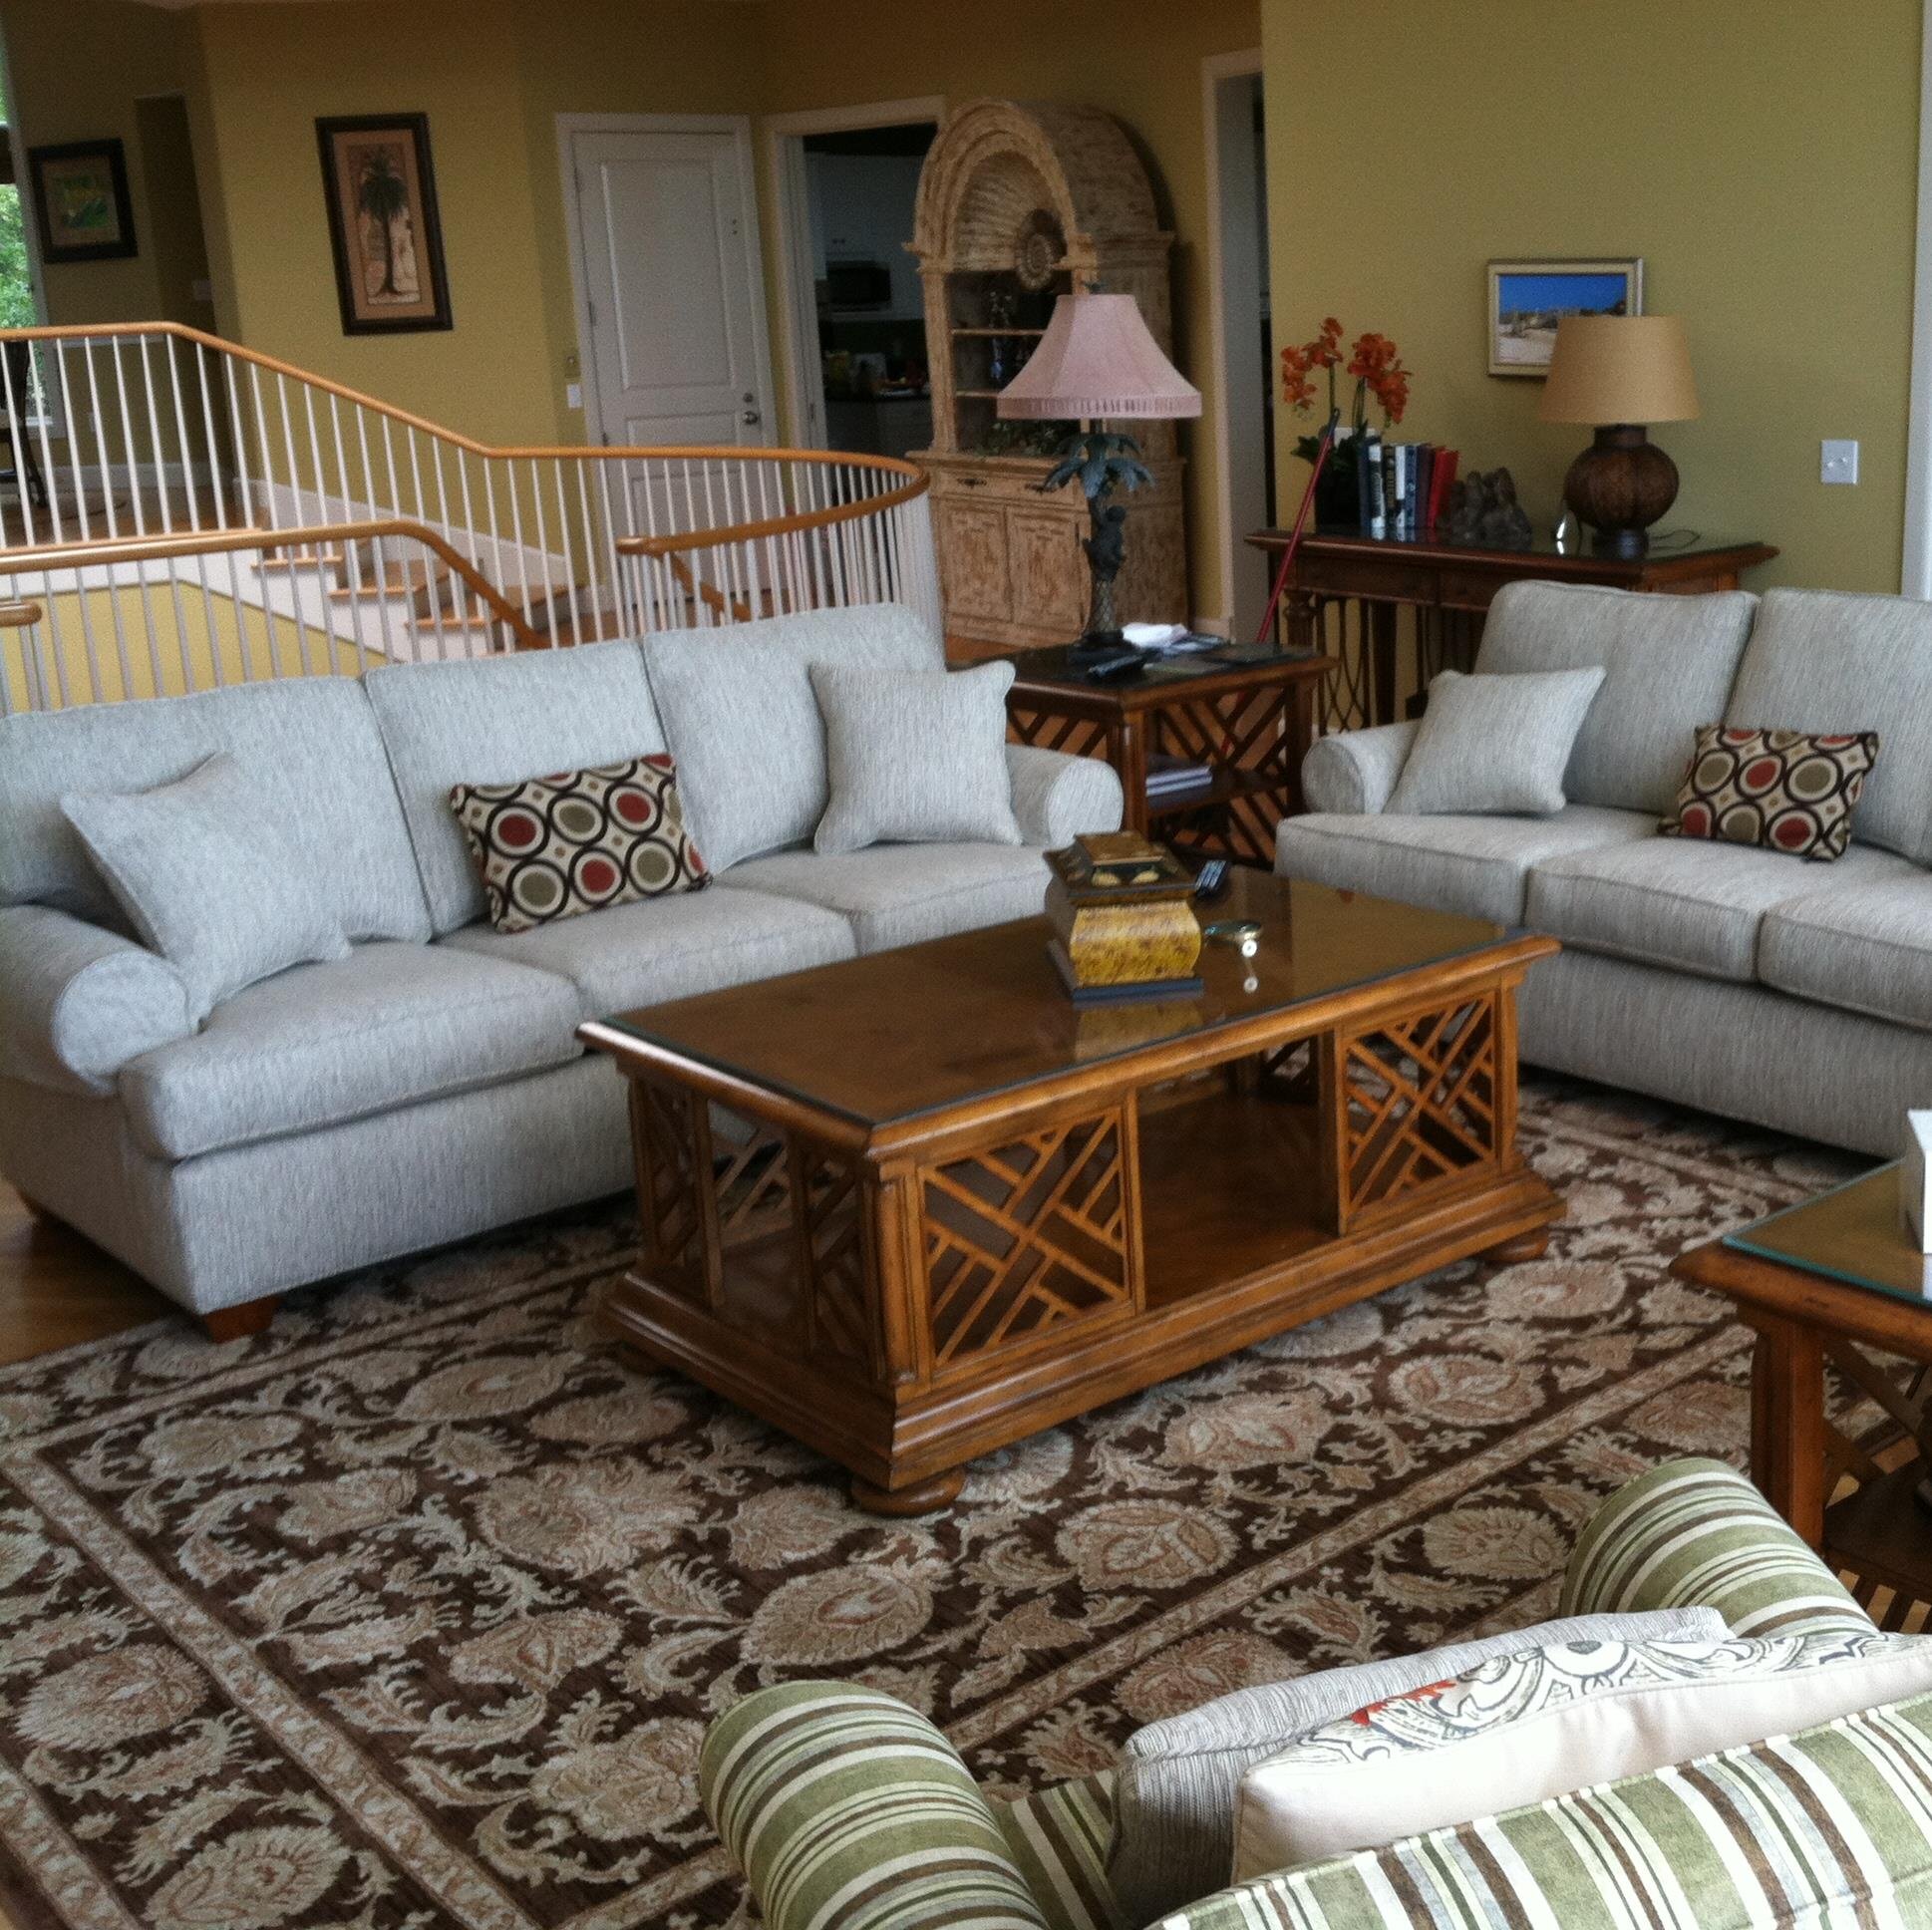 Family owned and operated since 1989, we are your premier shop for custom upholstery, draperies and home furnishings for Hilton Head and the surrounding areas.